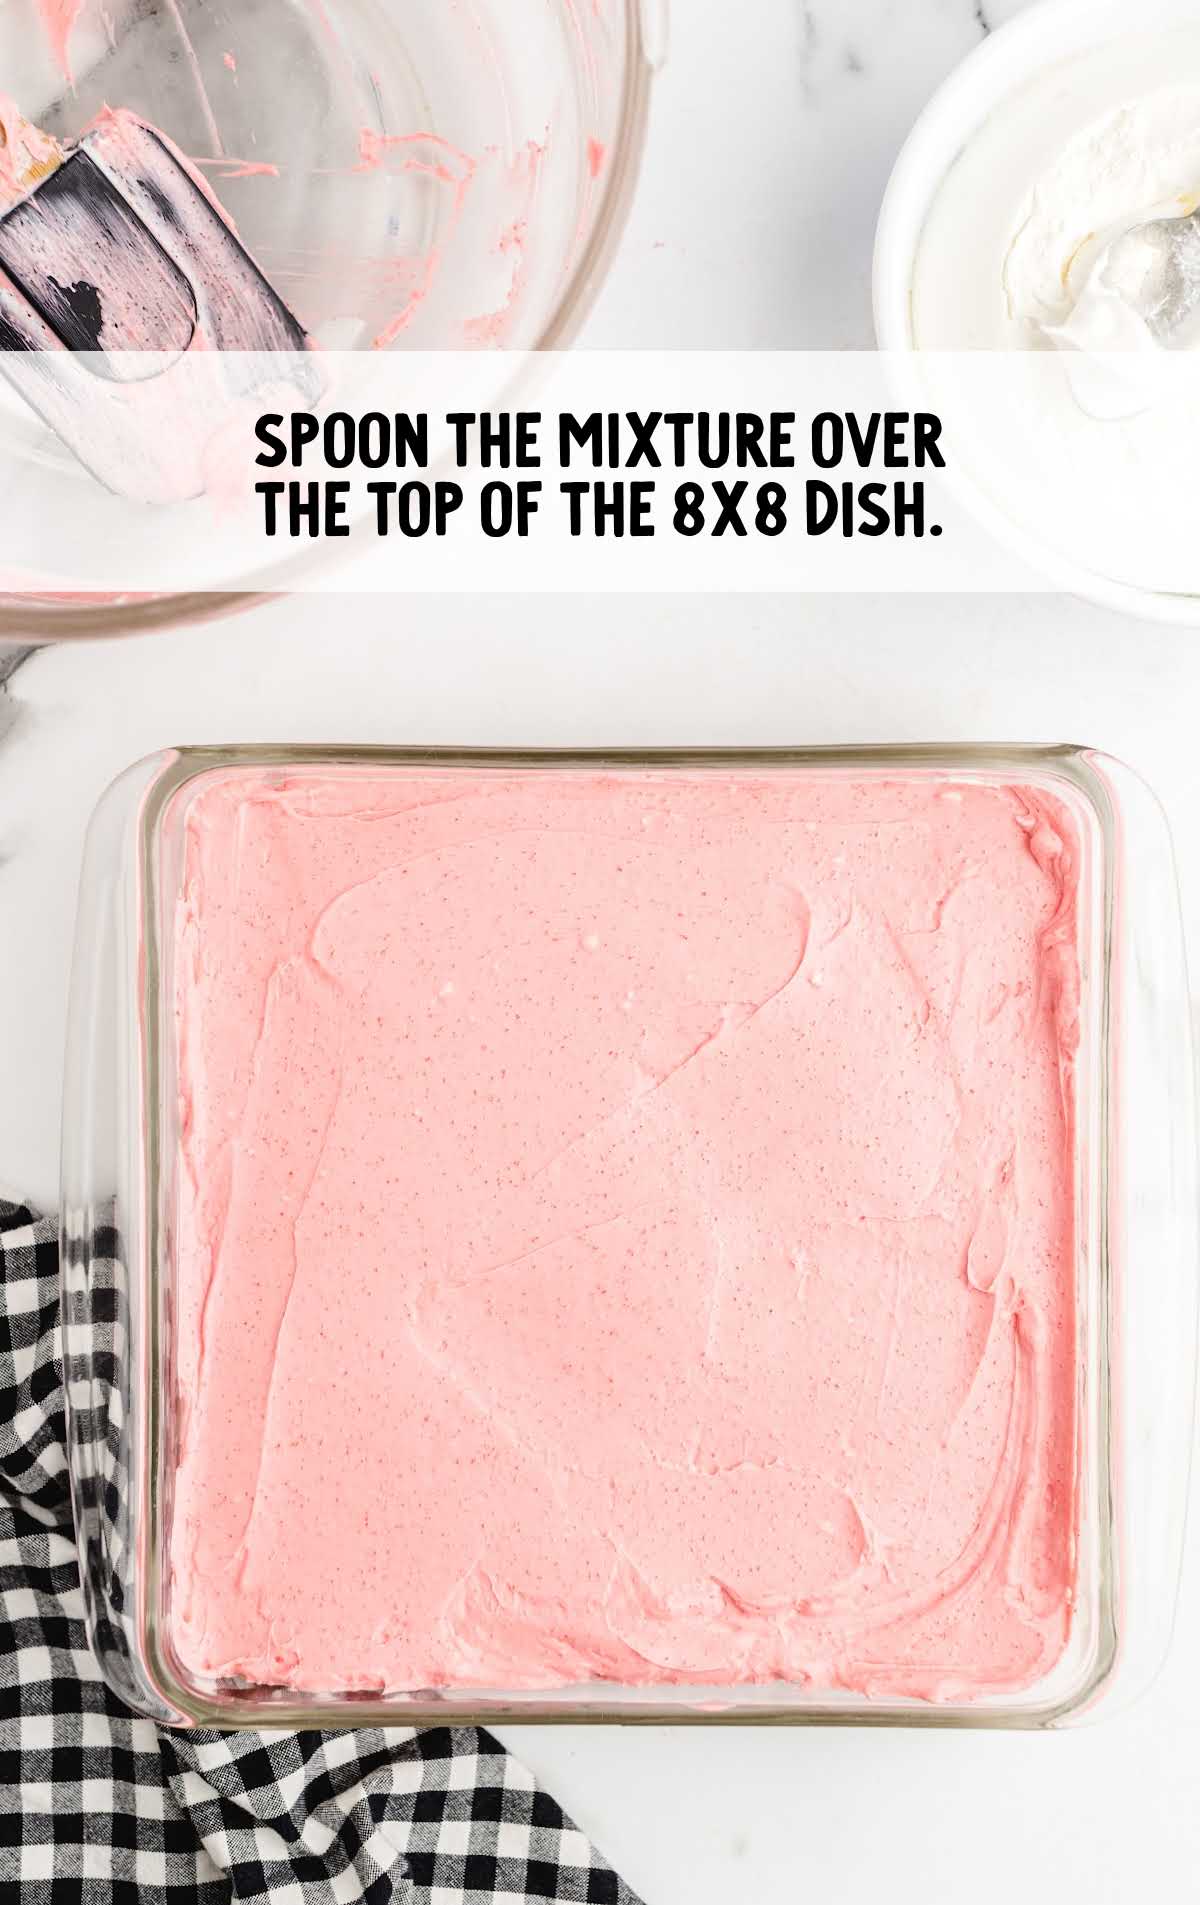 cream cheese and strawberry gelatin mixture spooned over the cake top in a baking dish